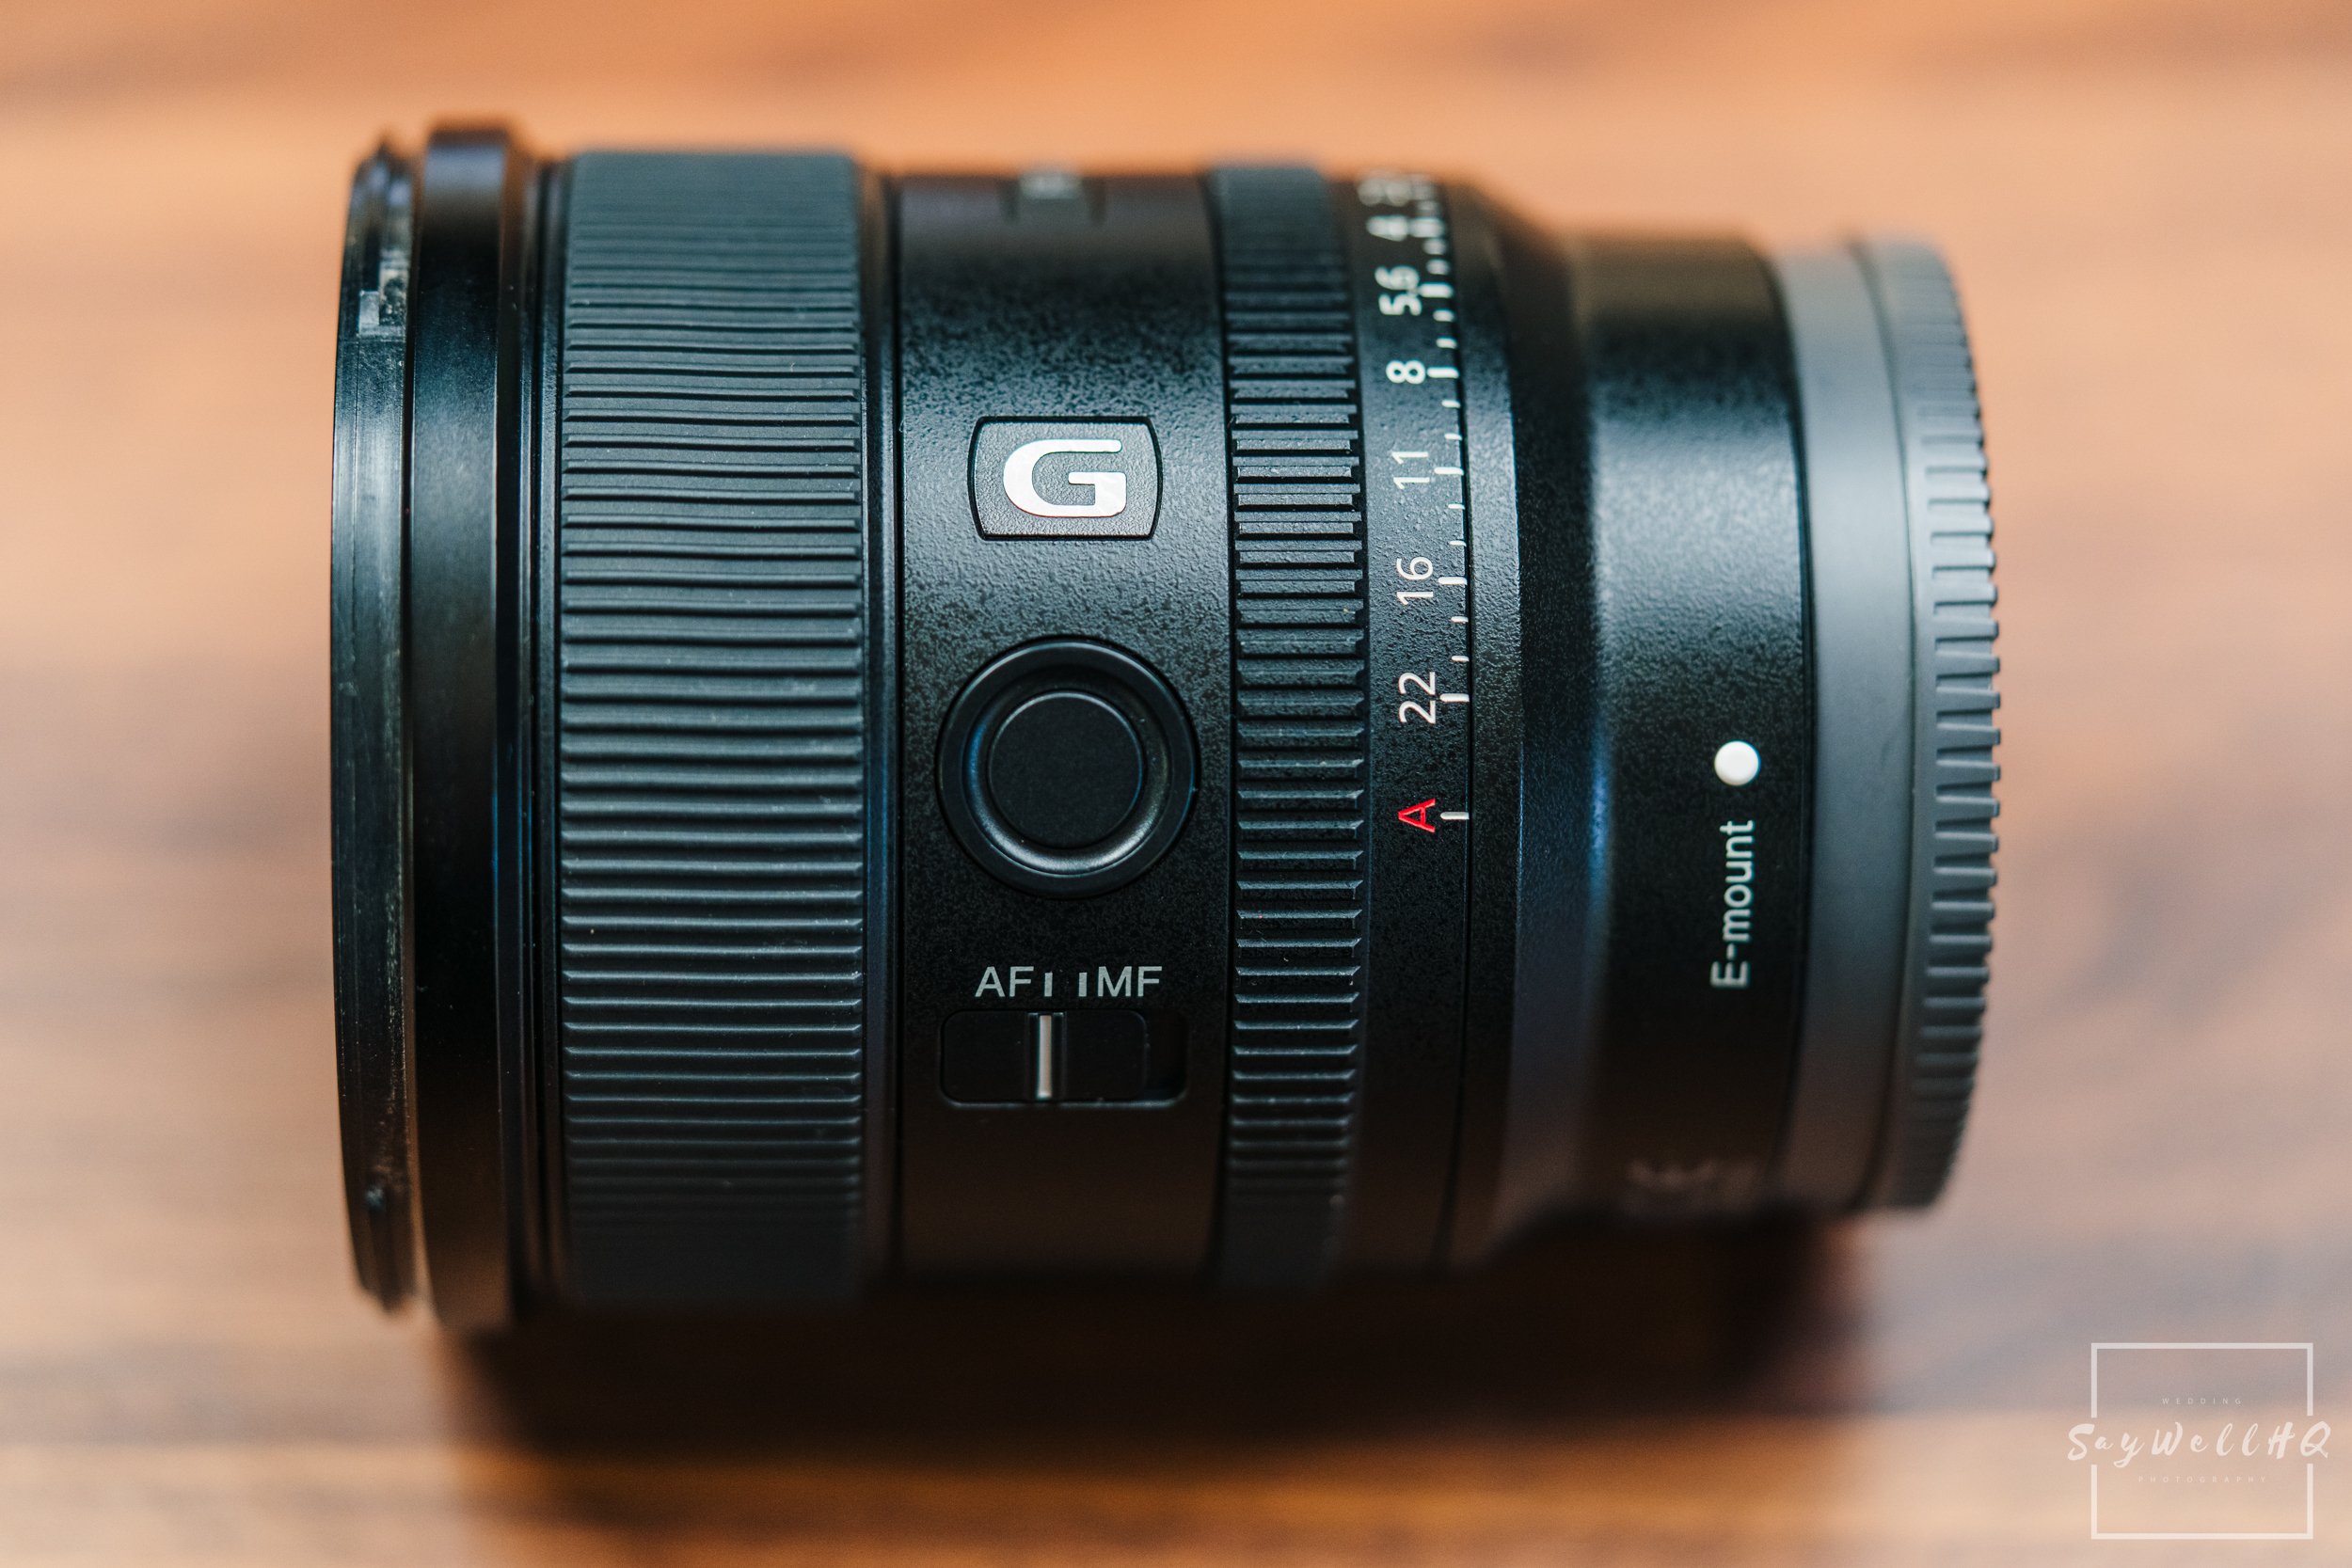  Being A New Style Of Lens It Comes With The Customisable Lens Button 